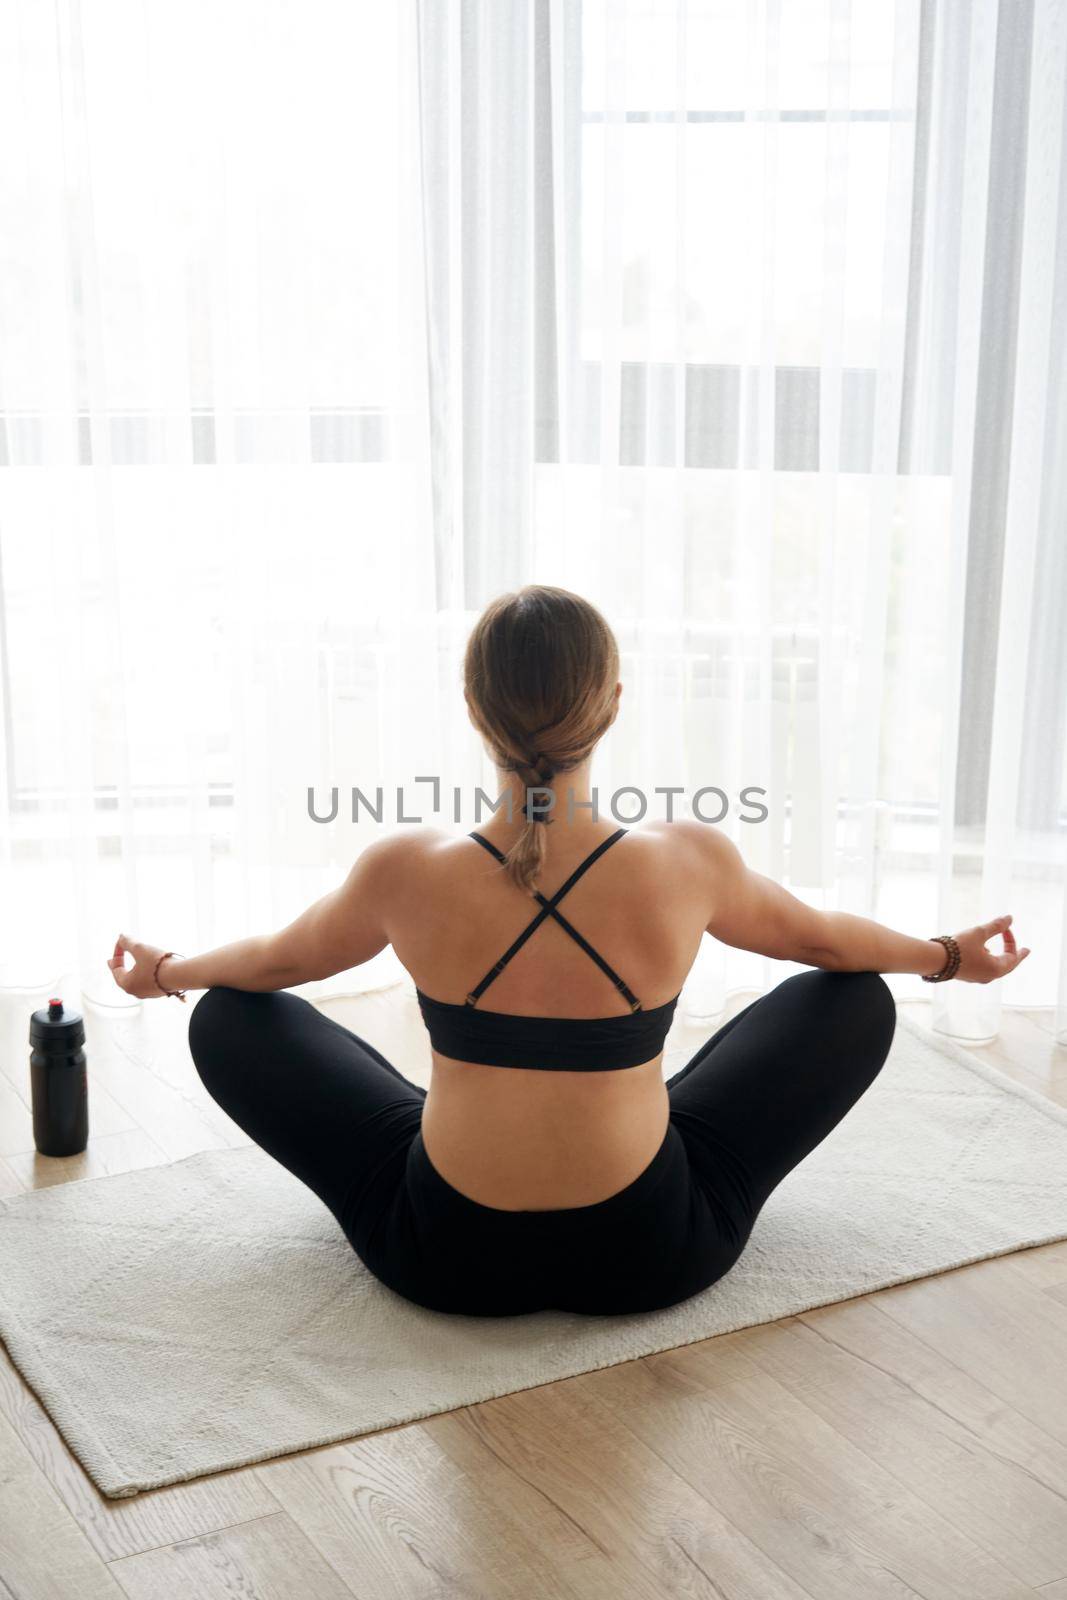 Back View Of Woman Sitting In Yoga Lotus Pose Relaxing And Meditating In Living Room